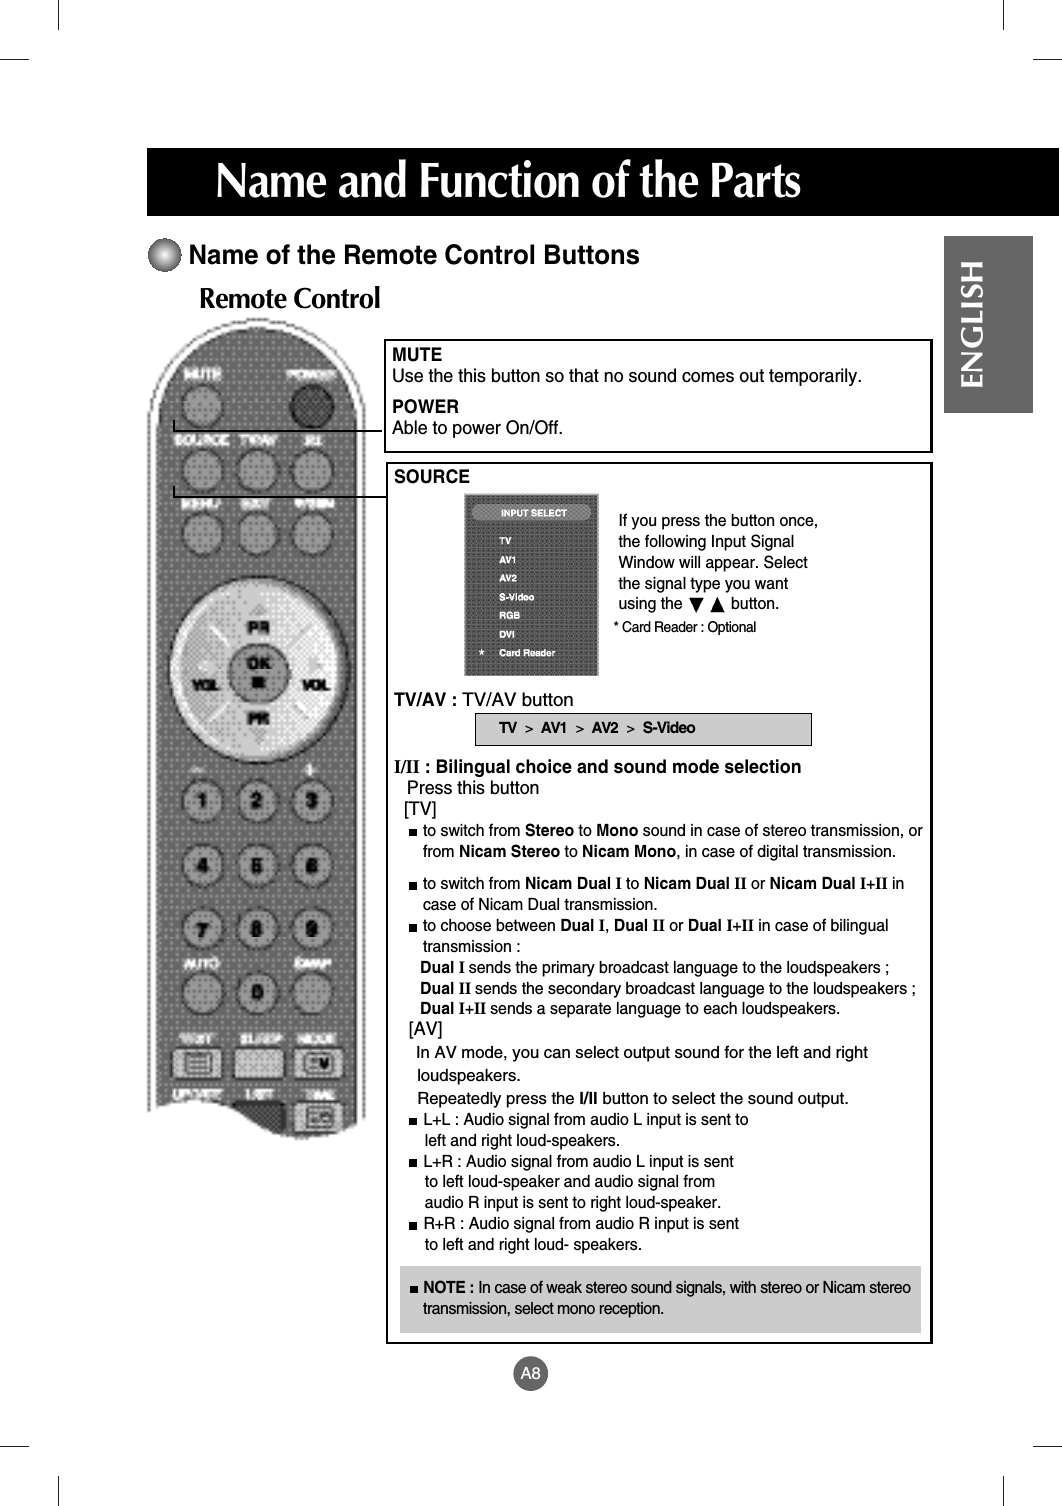 A8ENGLISHName and Function of the PartsName of the Remote Control ButtonsMUTE Use the this button so that no sound comes out temporarily.POWERAble to power On/Off.SOURCE TV/AV : TV/AV buttonI/II : Bilingual choice and sound mode selectionPress this button[TV]to switch from Stereo to Mono sound in case of stereo transmission, orfrom Nicam Stereo to Nicam Mono, in case of digital transmission.to switch from Nicam Dual Ito Nicam Dual II or Nicam Dual I+II incase of Nicam Dual transmission.to choose between Dual I, Dual II or Dual I+II in case of bilingualtransmission : Dual I sends the primary broadcast language to the loudspeakers ;Dual II sends the secondary broadcast language to the loudspeakers ;Dual I+II sends a separate language to each loudspeakers.[AV]In AV mode, you can select output sound for the left and right loudspeakers.Repeatedly press the I/II button to select the sound output.L+L : Audio signal from audio L input is sent to left and right loud-speakers.L+R : Audio signal from audio L input is sent to left loud-speaker and audio signal from audio R input is sent to right loud-speaker.R+R : Audio signal from audio R input is sent to left and right loud- speakers.If you press the button once,the following Input SignalWindow will appear. Selectthe signal type you wantusing the           button.TV  &gt;AV1 &gt;AV2 &gt;S-VideoNOTE : In case of weak stereo sound signals, with stereo or Nicam stereotransmission, select mono reception.Remote Control* Card Reader : Optional*